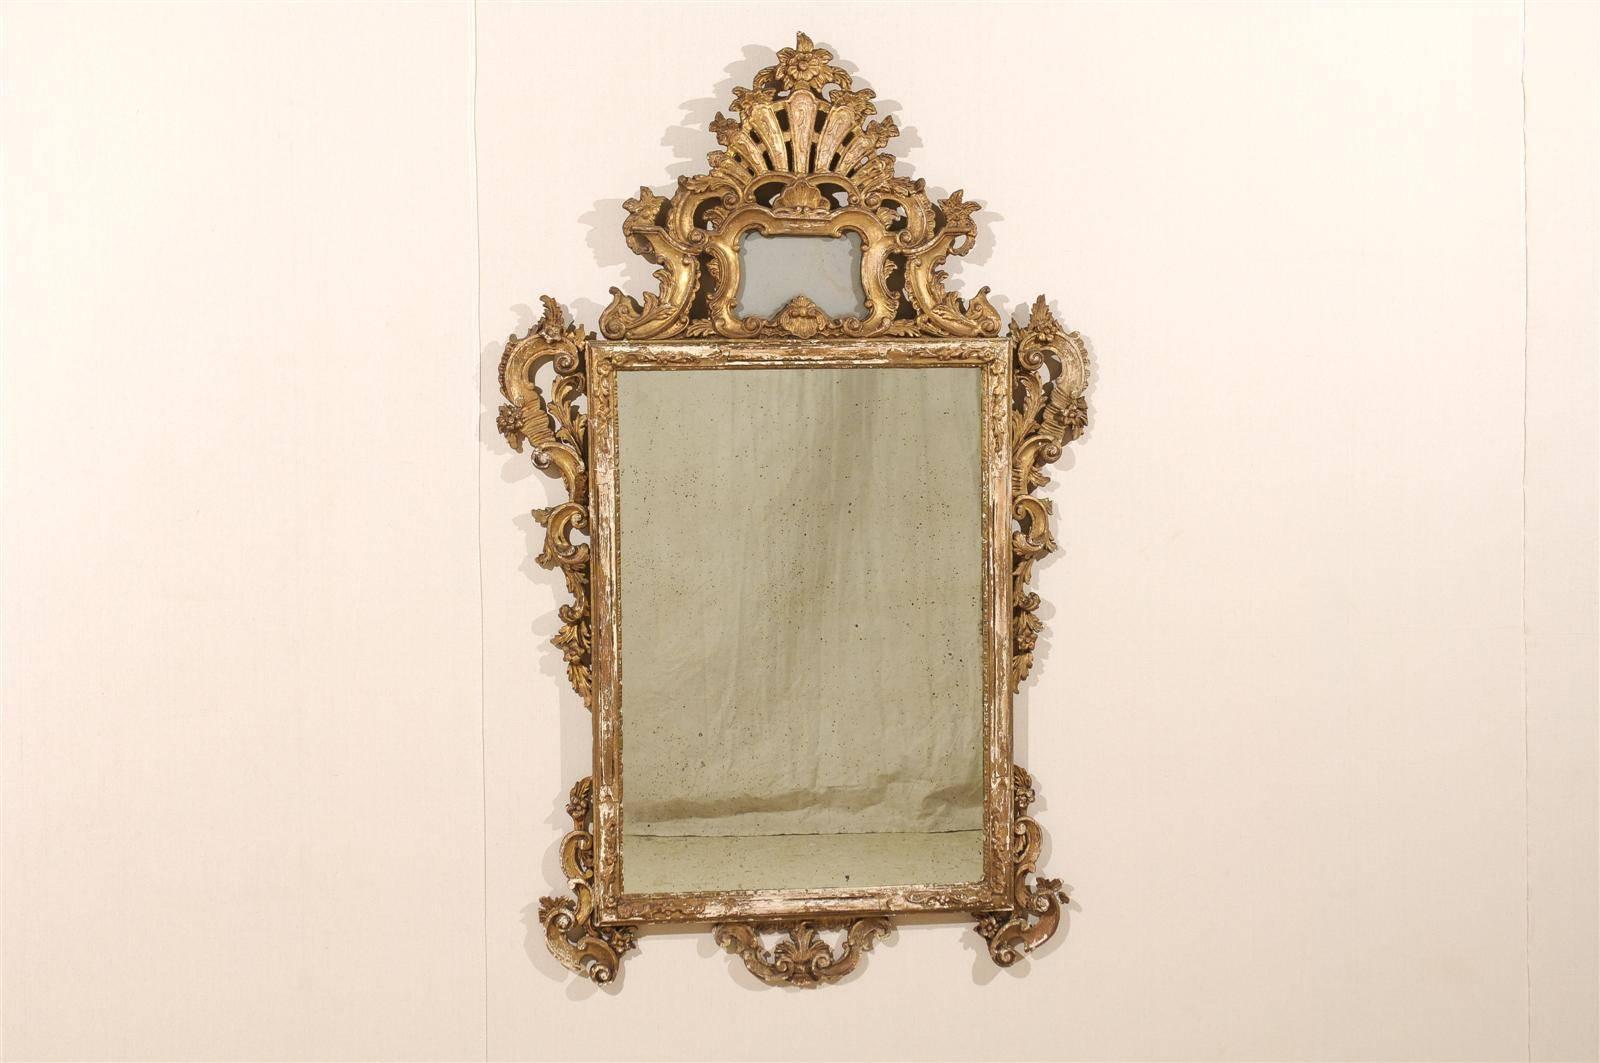 An Italian 19th century mirror. This giltwood Rococo style Italian mirror features a highly carved crest with flower carving at the very top. Below the carving, a cartouche motif. A series of volutes and scrolls decorate the sides. The corners of